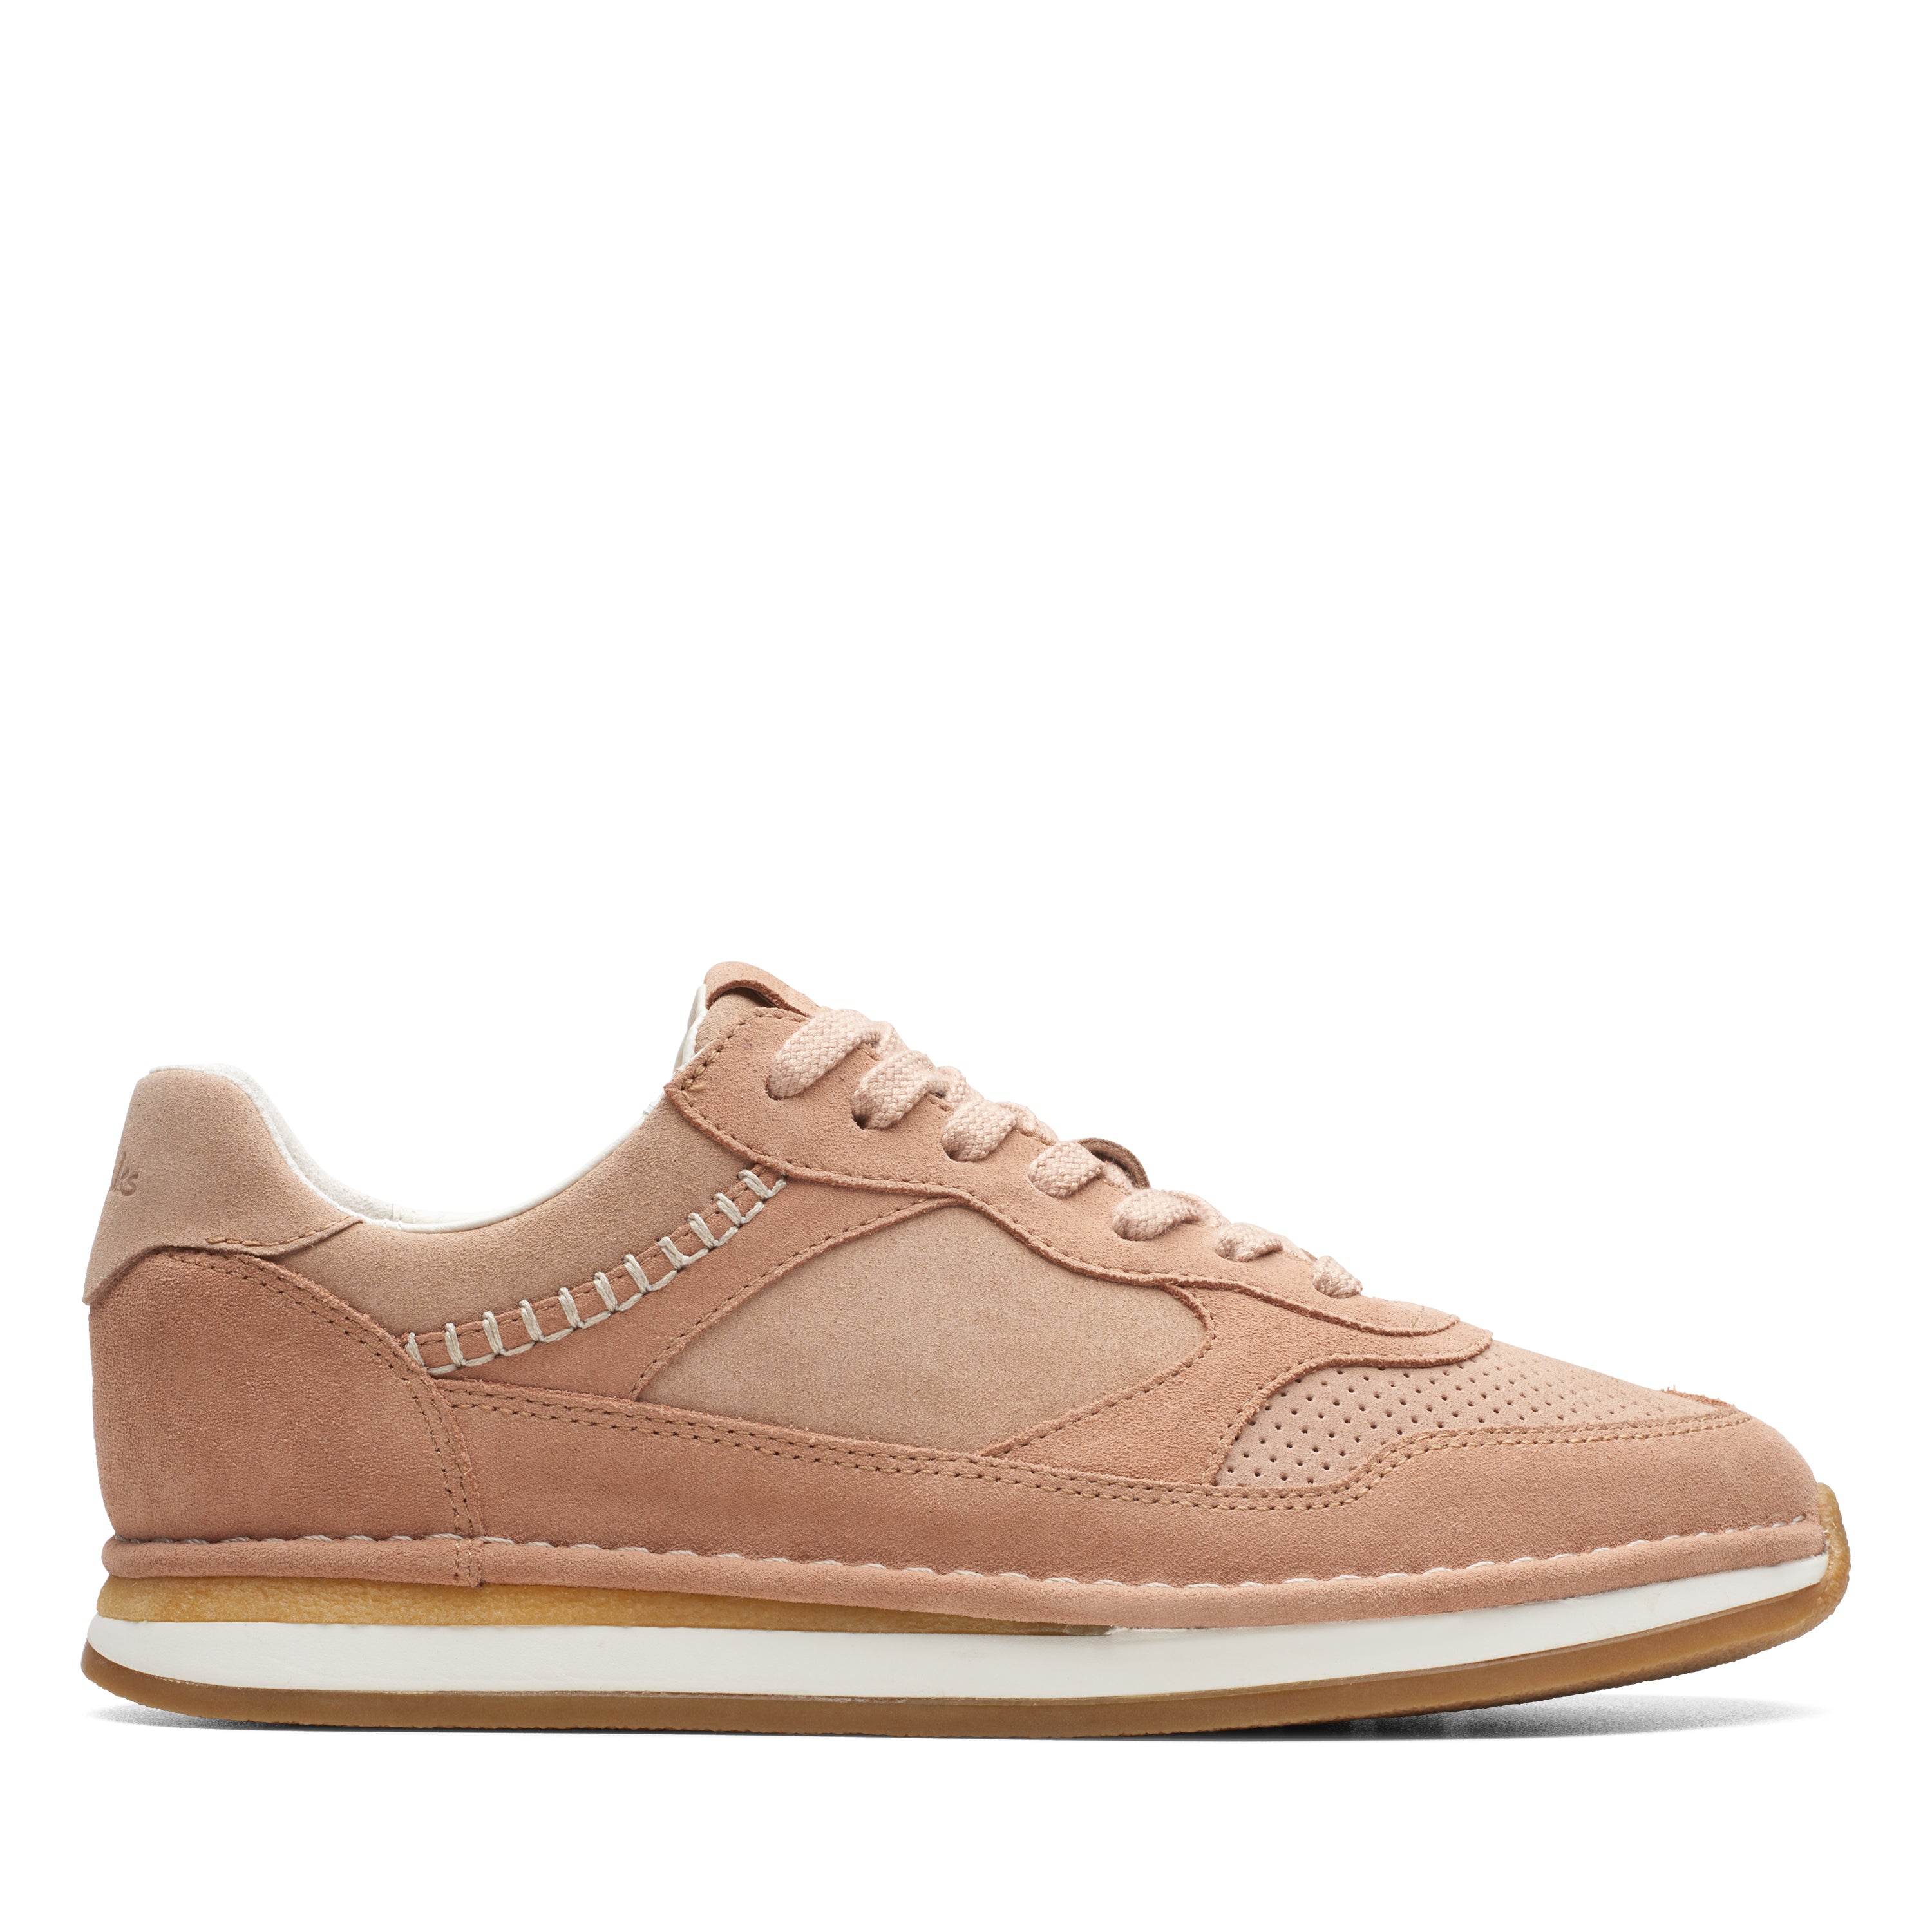 Women's Space-Star shoes in tobacco-colored suede with shearling lining |  Golden Goose